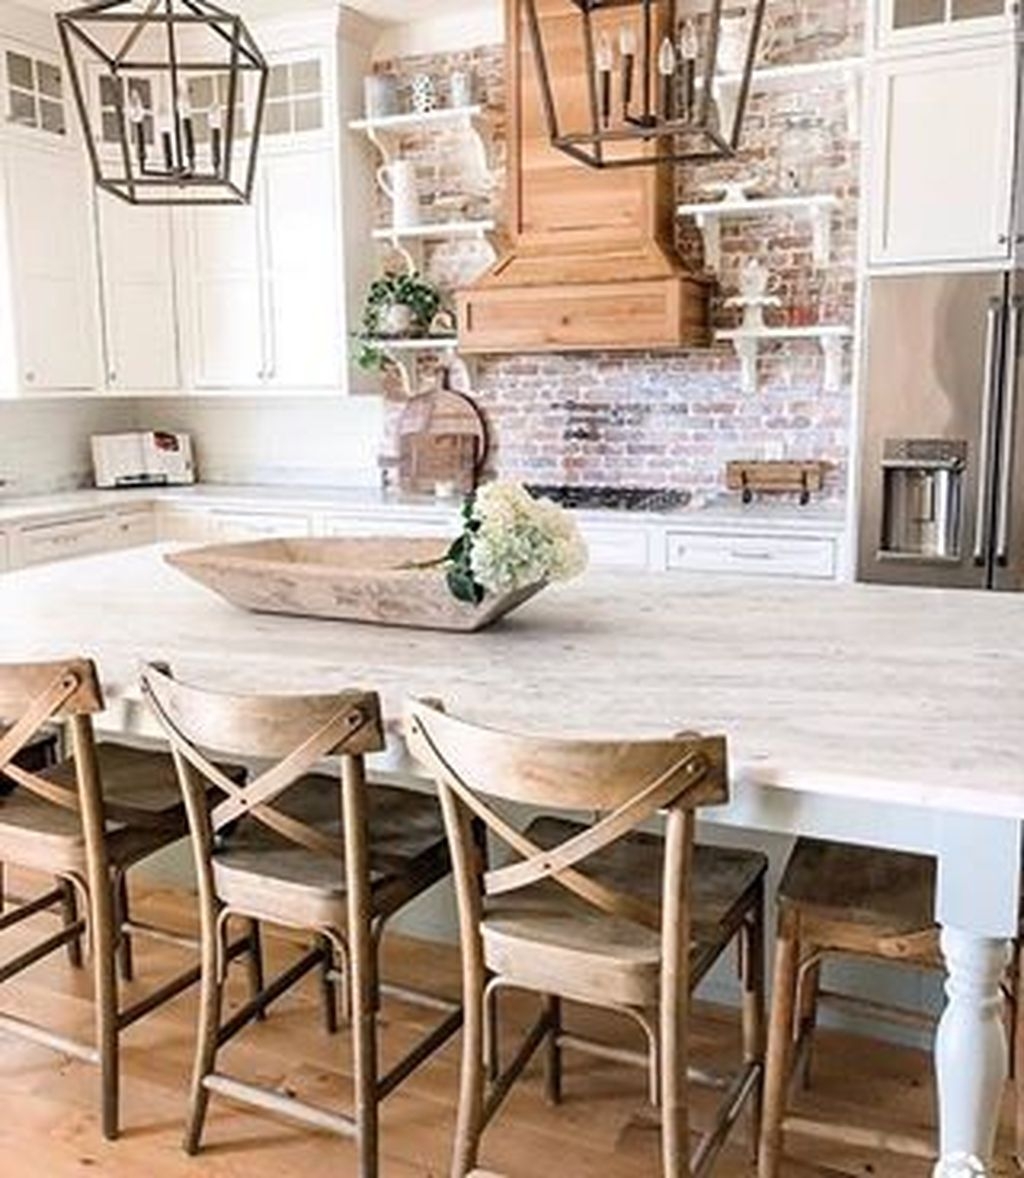 Rustic Farmhouse Kitchen Ideas To Get Traditional Accent 43